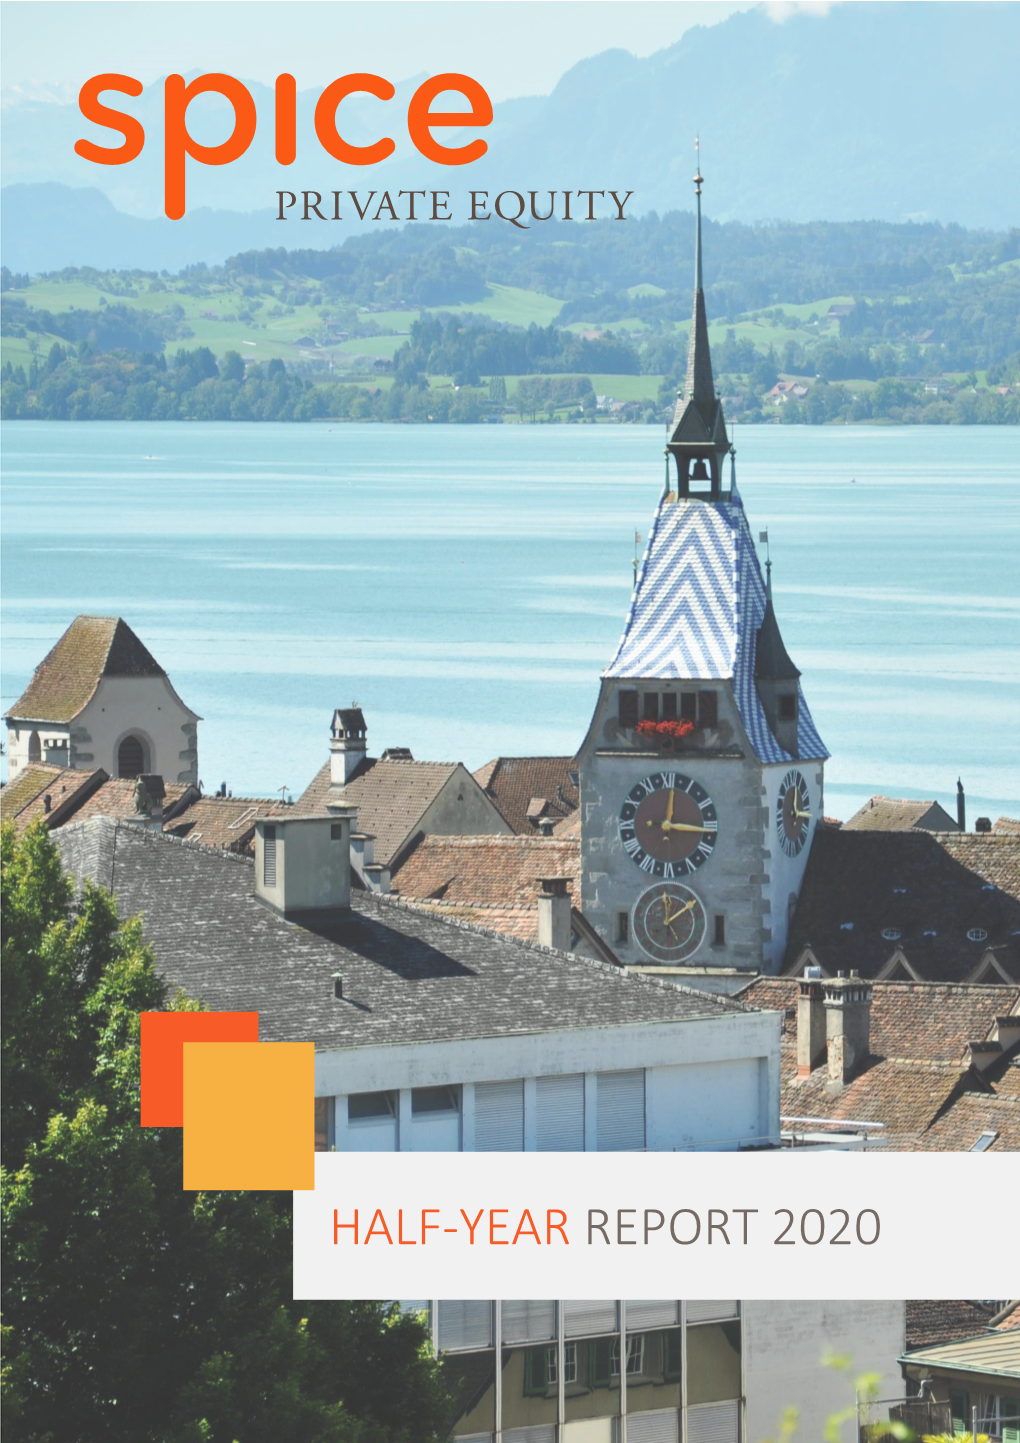 Half-Year Report 2020 Contents